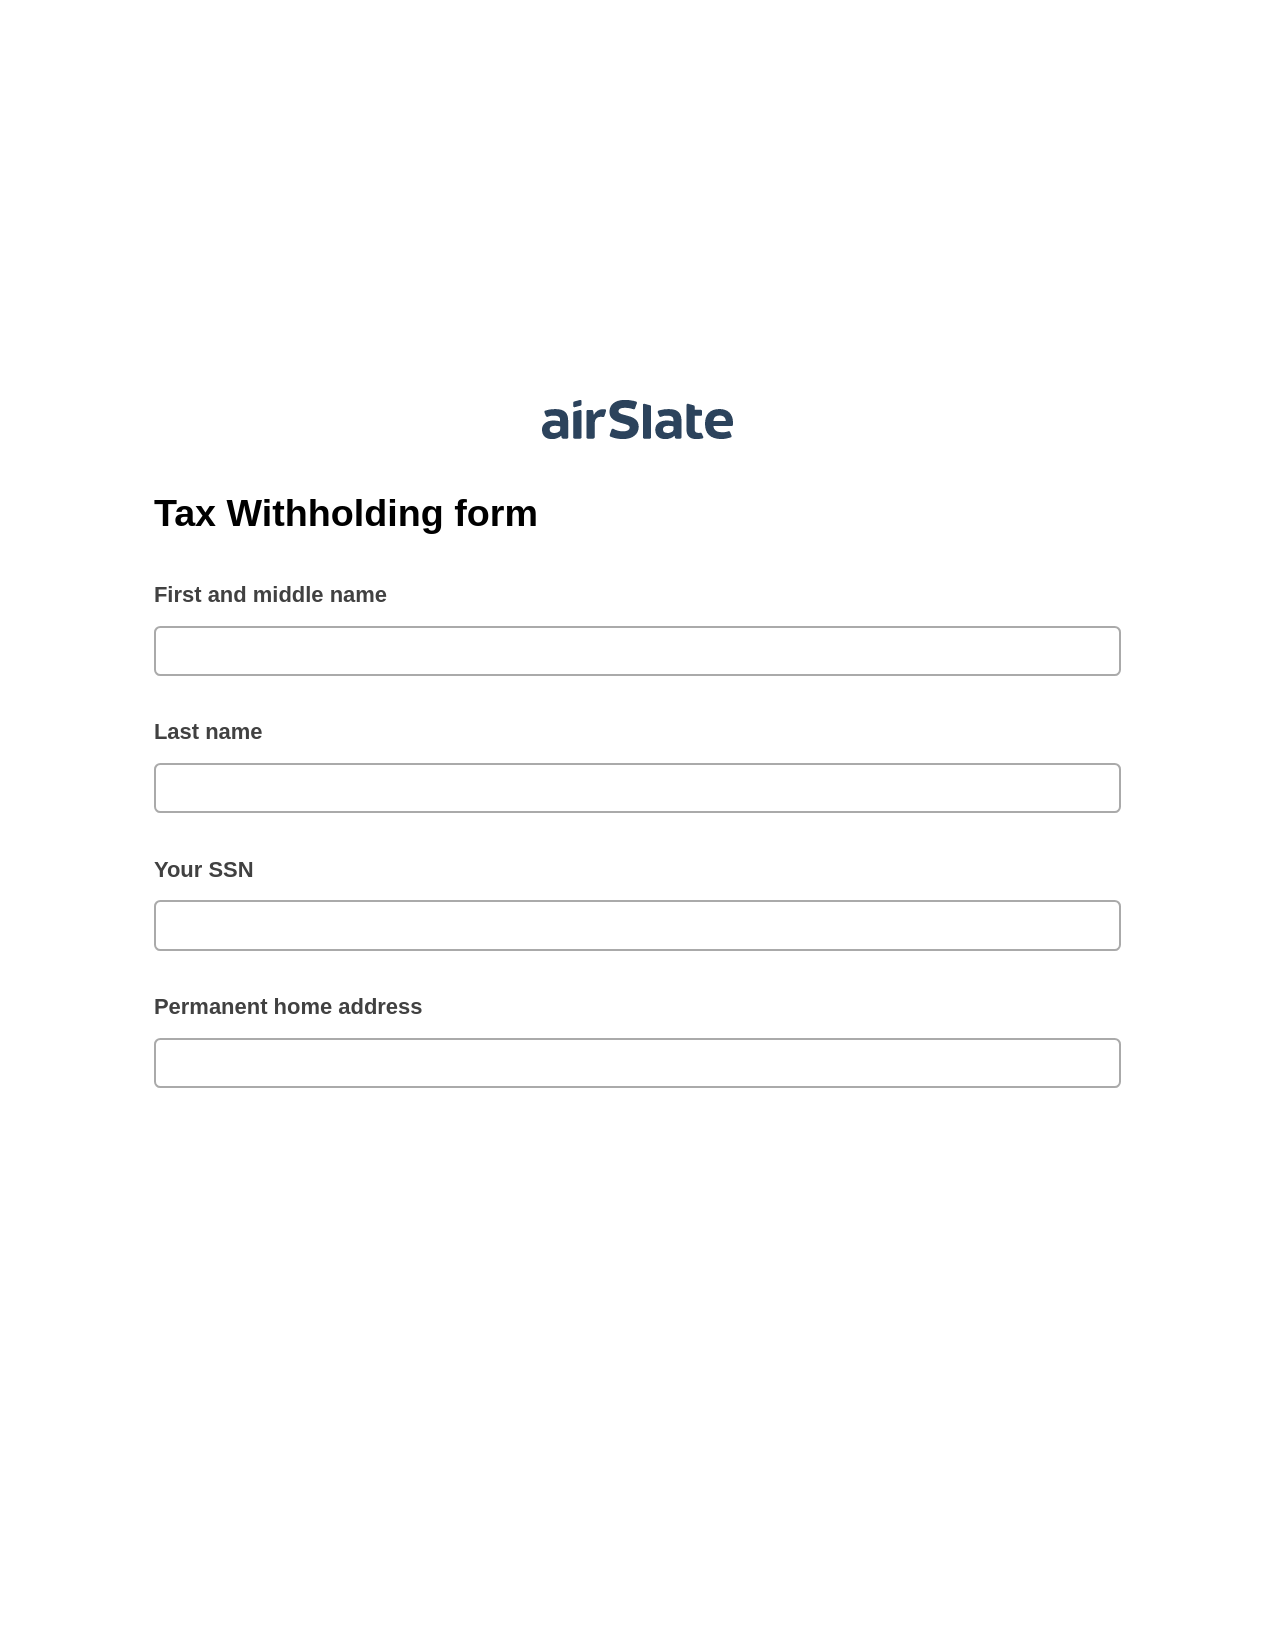 Tax Withholding form Pre-fill Slate from MS Dynamics 365 Records Bot, Create MS Dynamics 365 Records Bot, Slack Two-Way Binding Bot